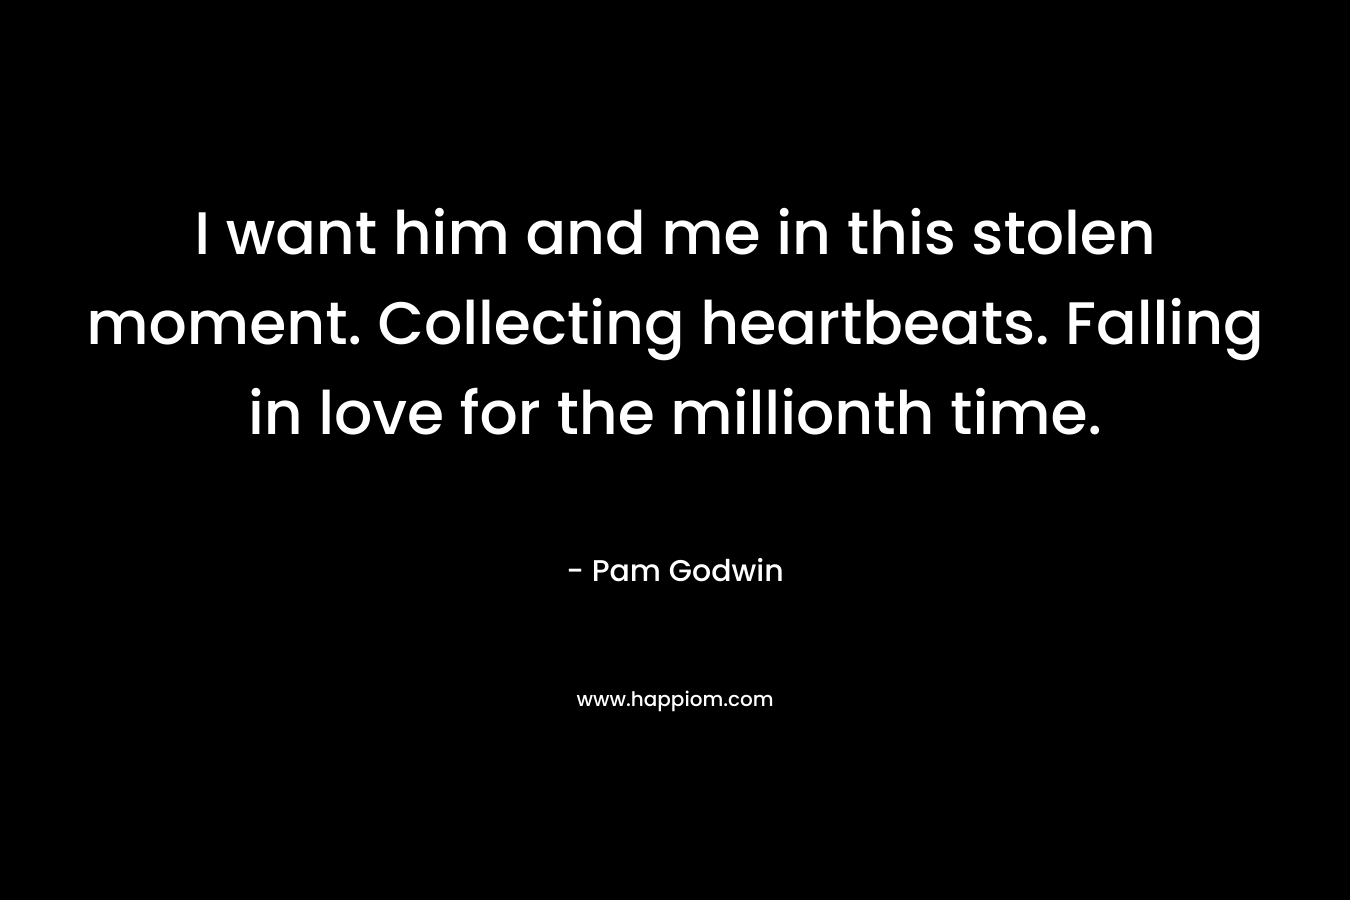 I want him and me in this stolen moment. Collecting heartbeats. Falling in love for the millionth time. – Pam Godwin